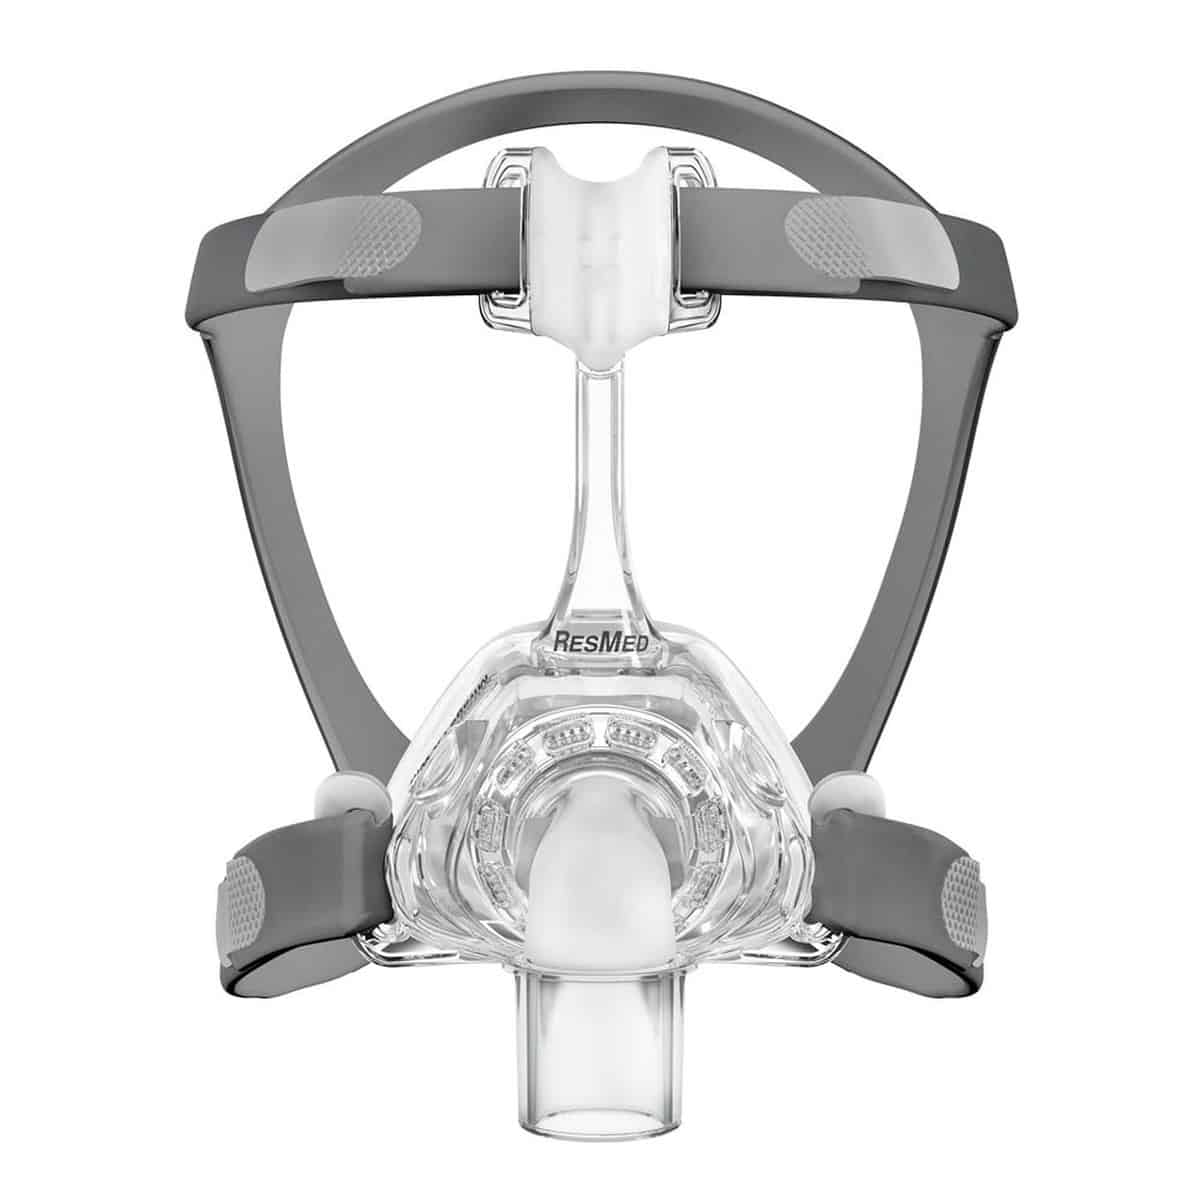 Featured image for “ResMed Mirage FX - Nasal Mask”